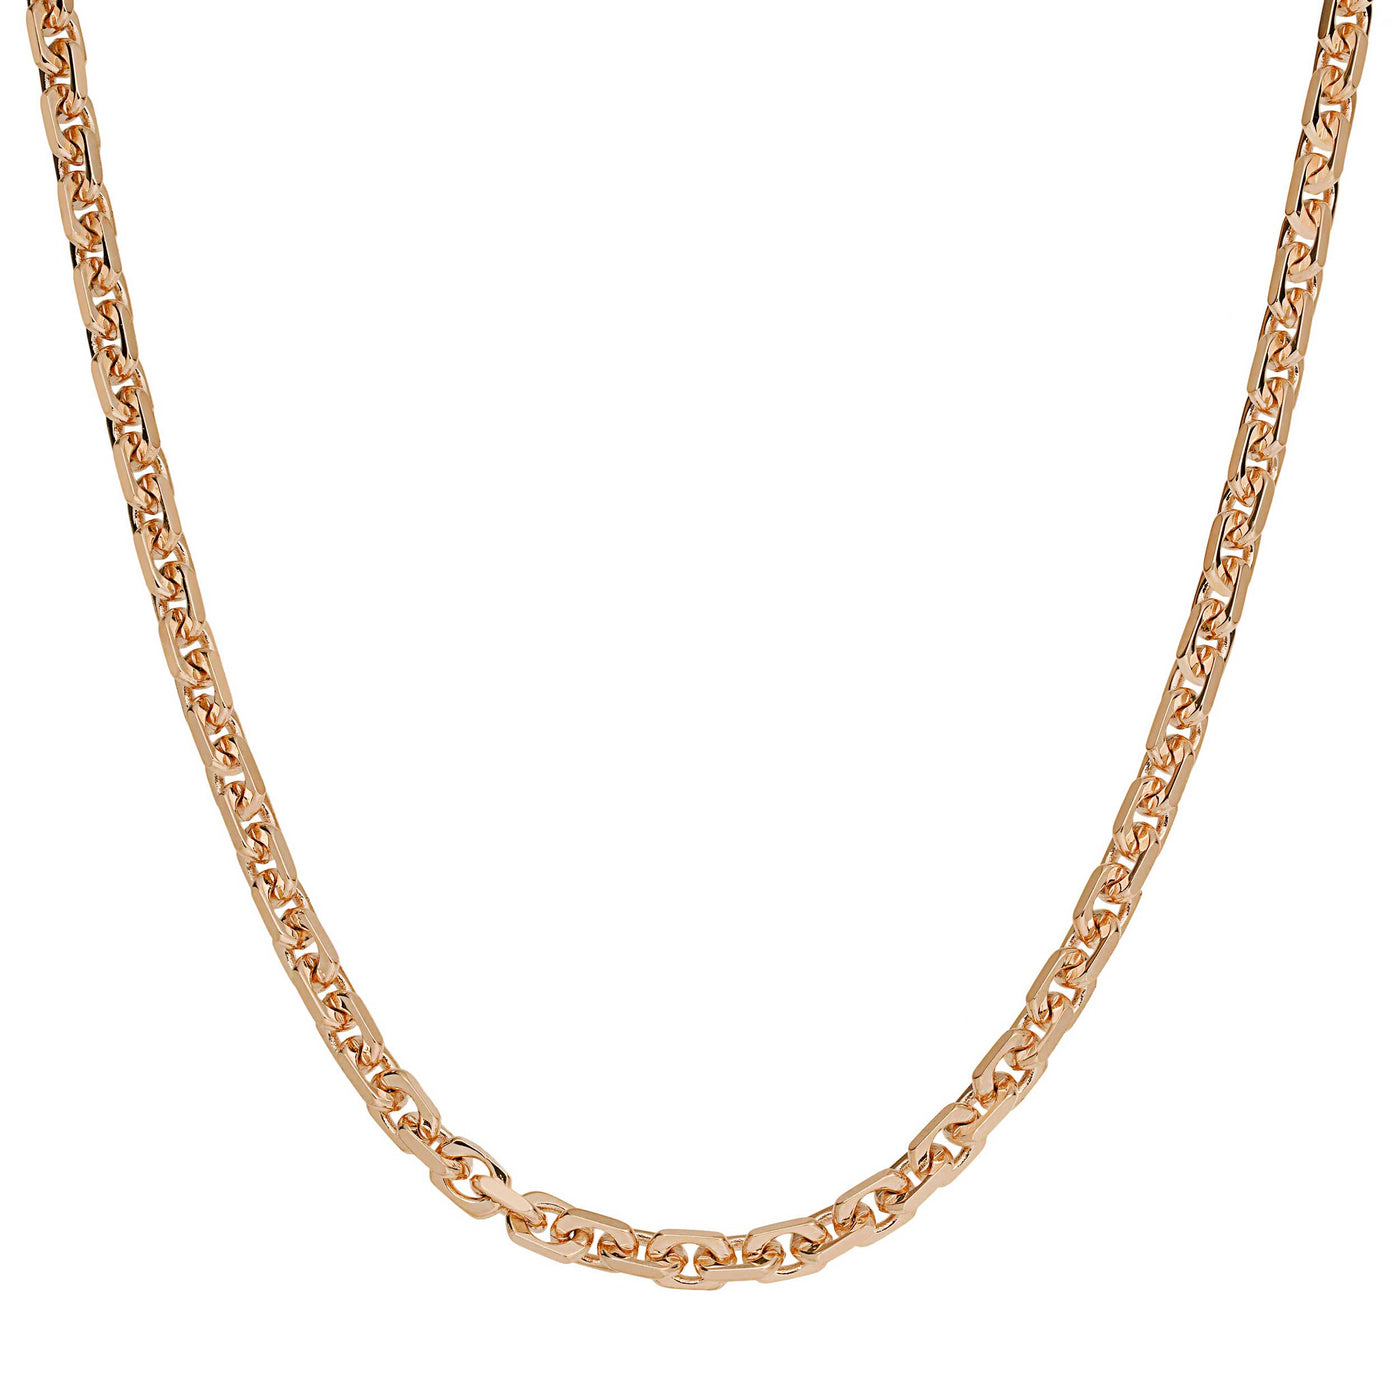 Women's Chunky Box Link Chain Necklace Solid 14K Gold